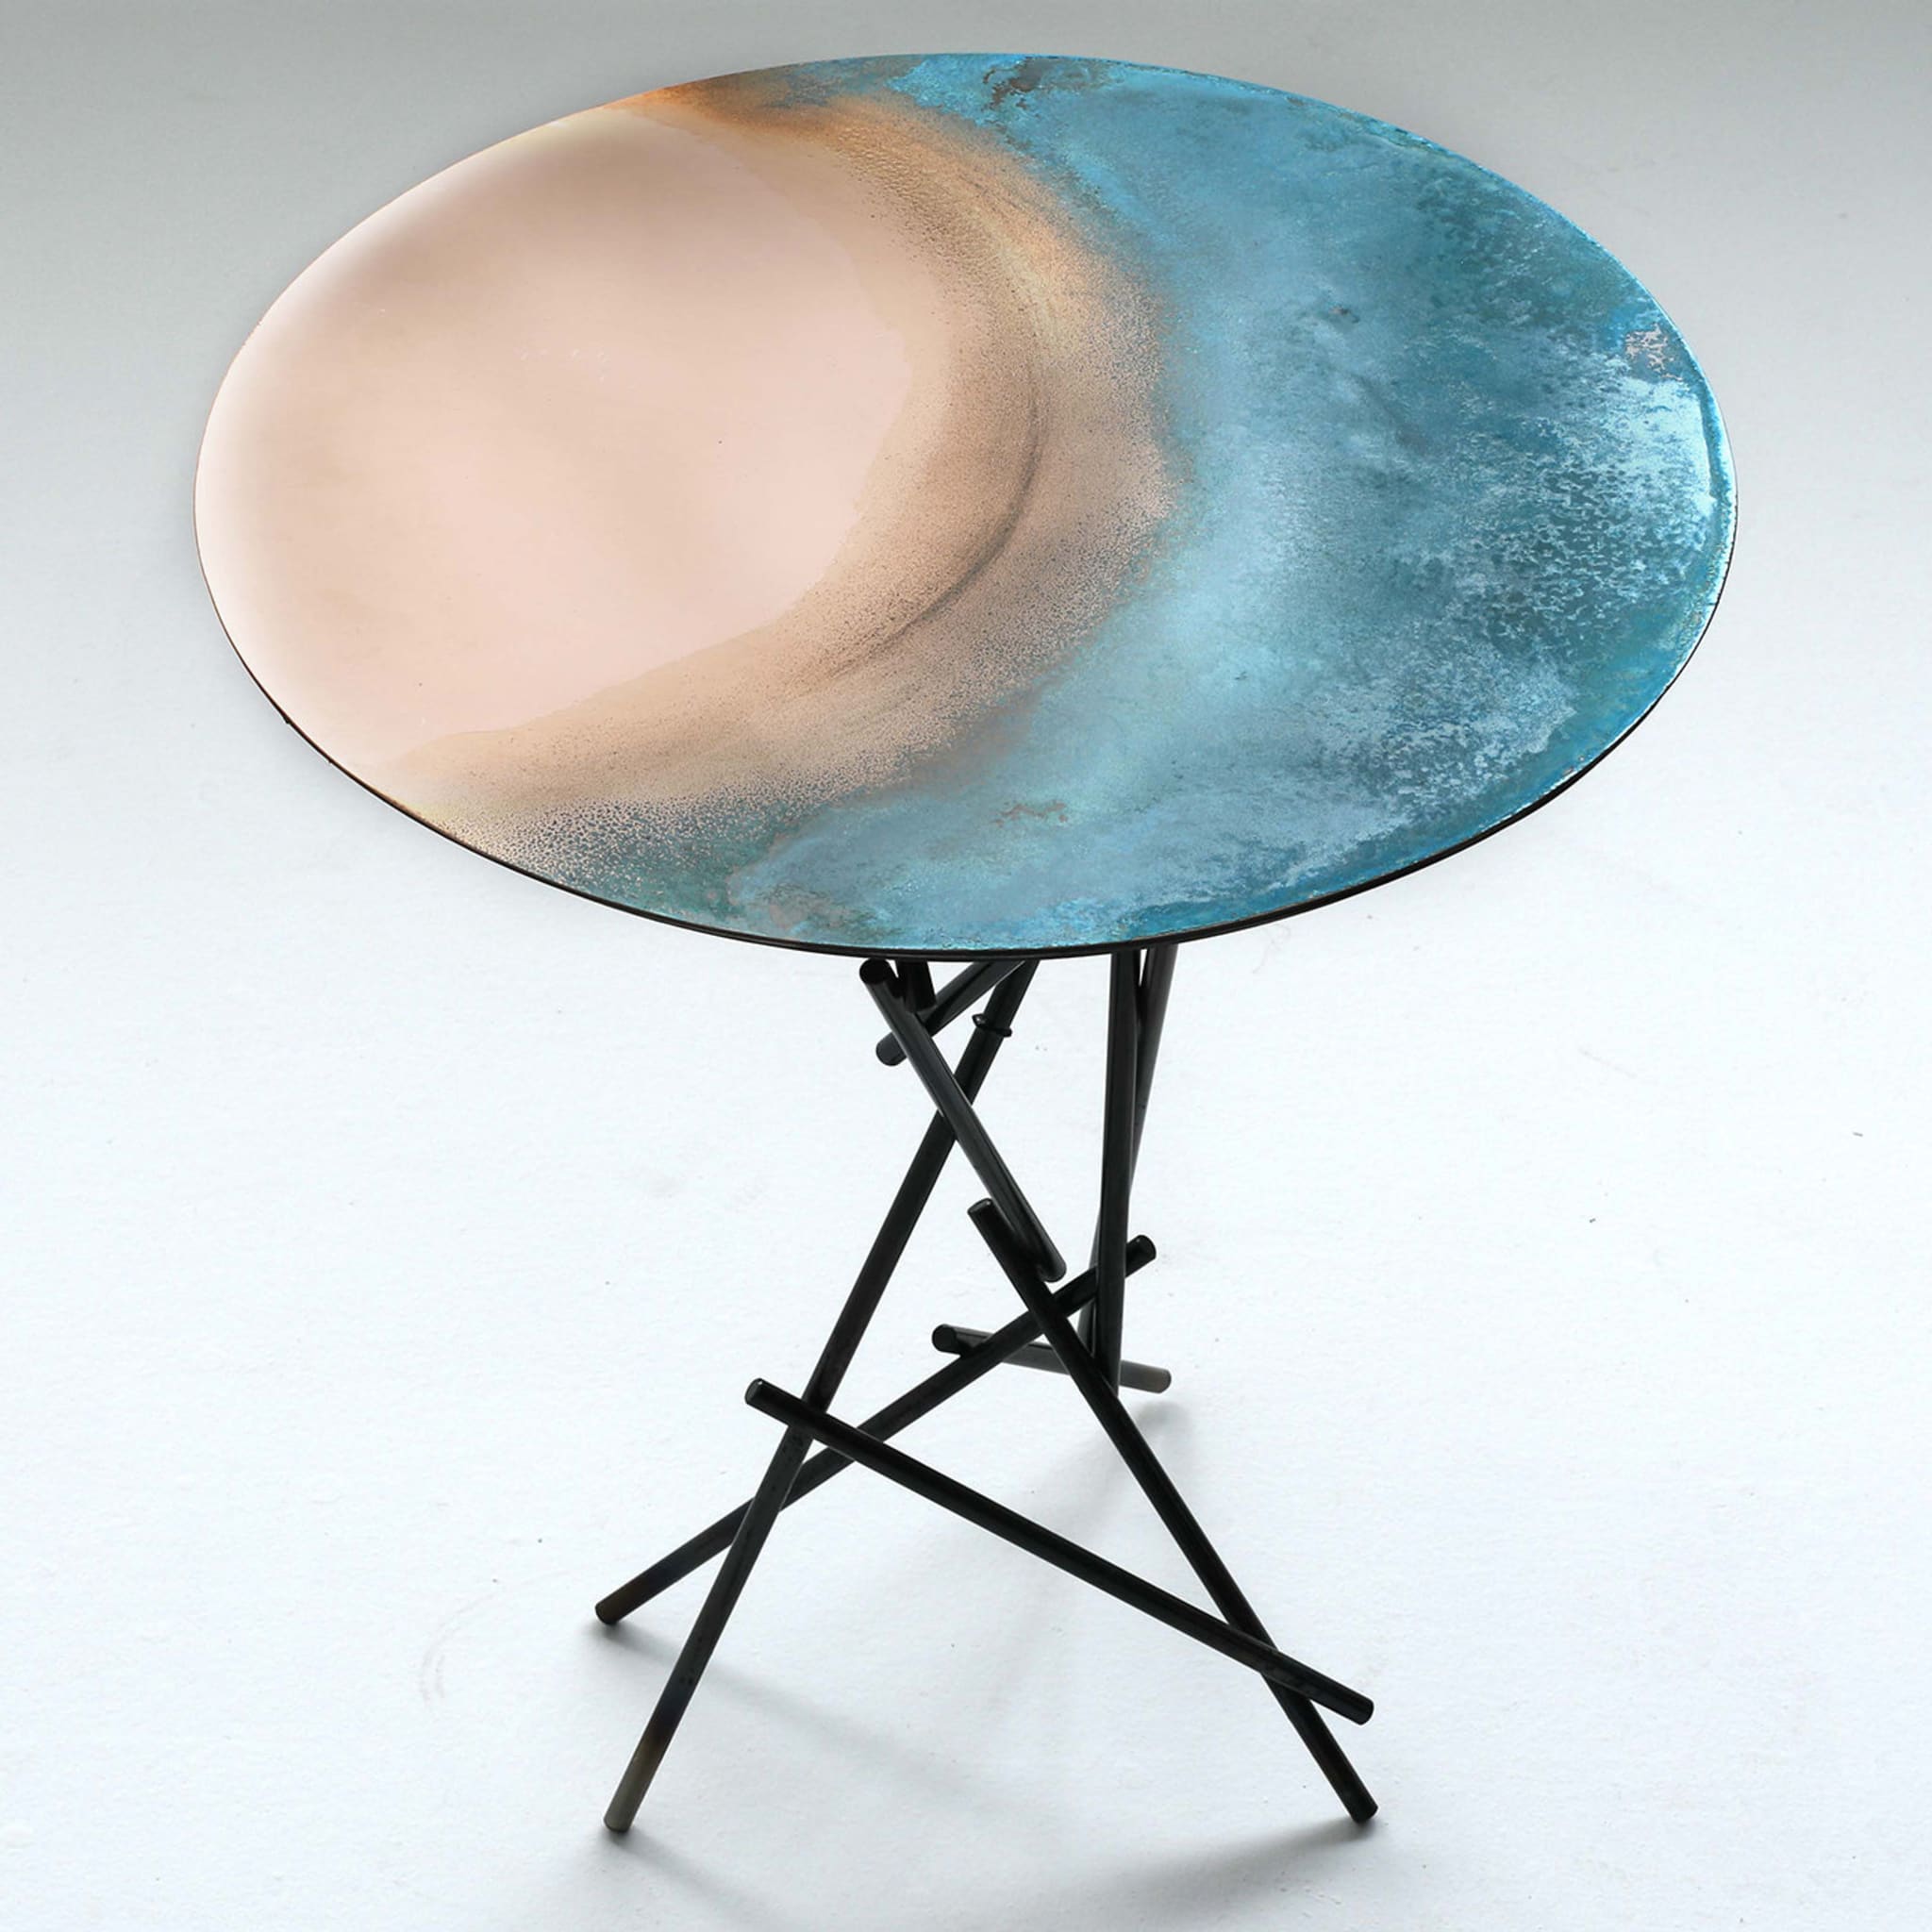 Copper Blue Side Table - Alternative view 1